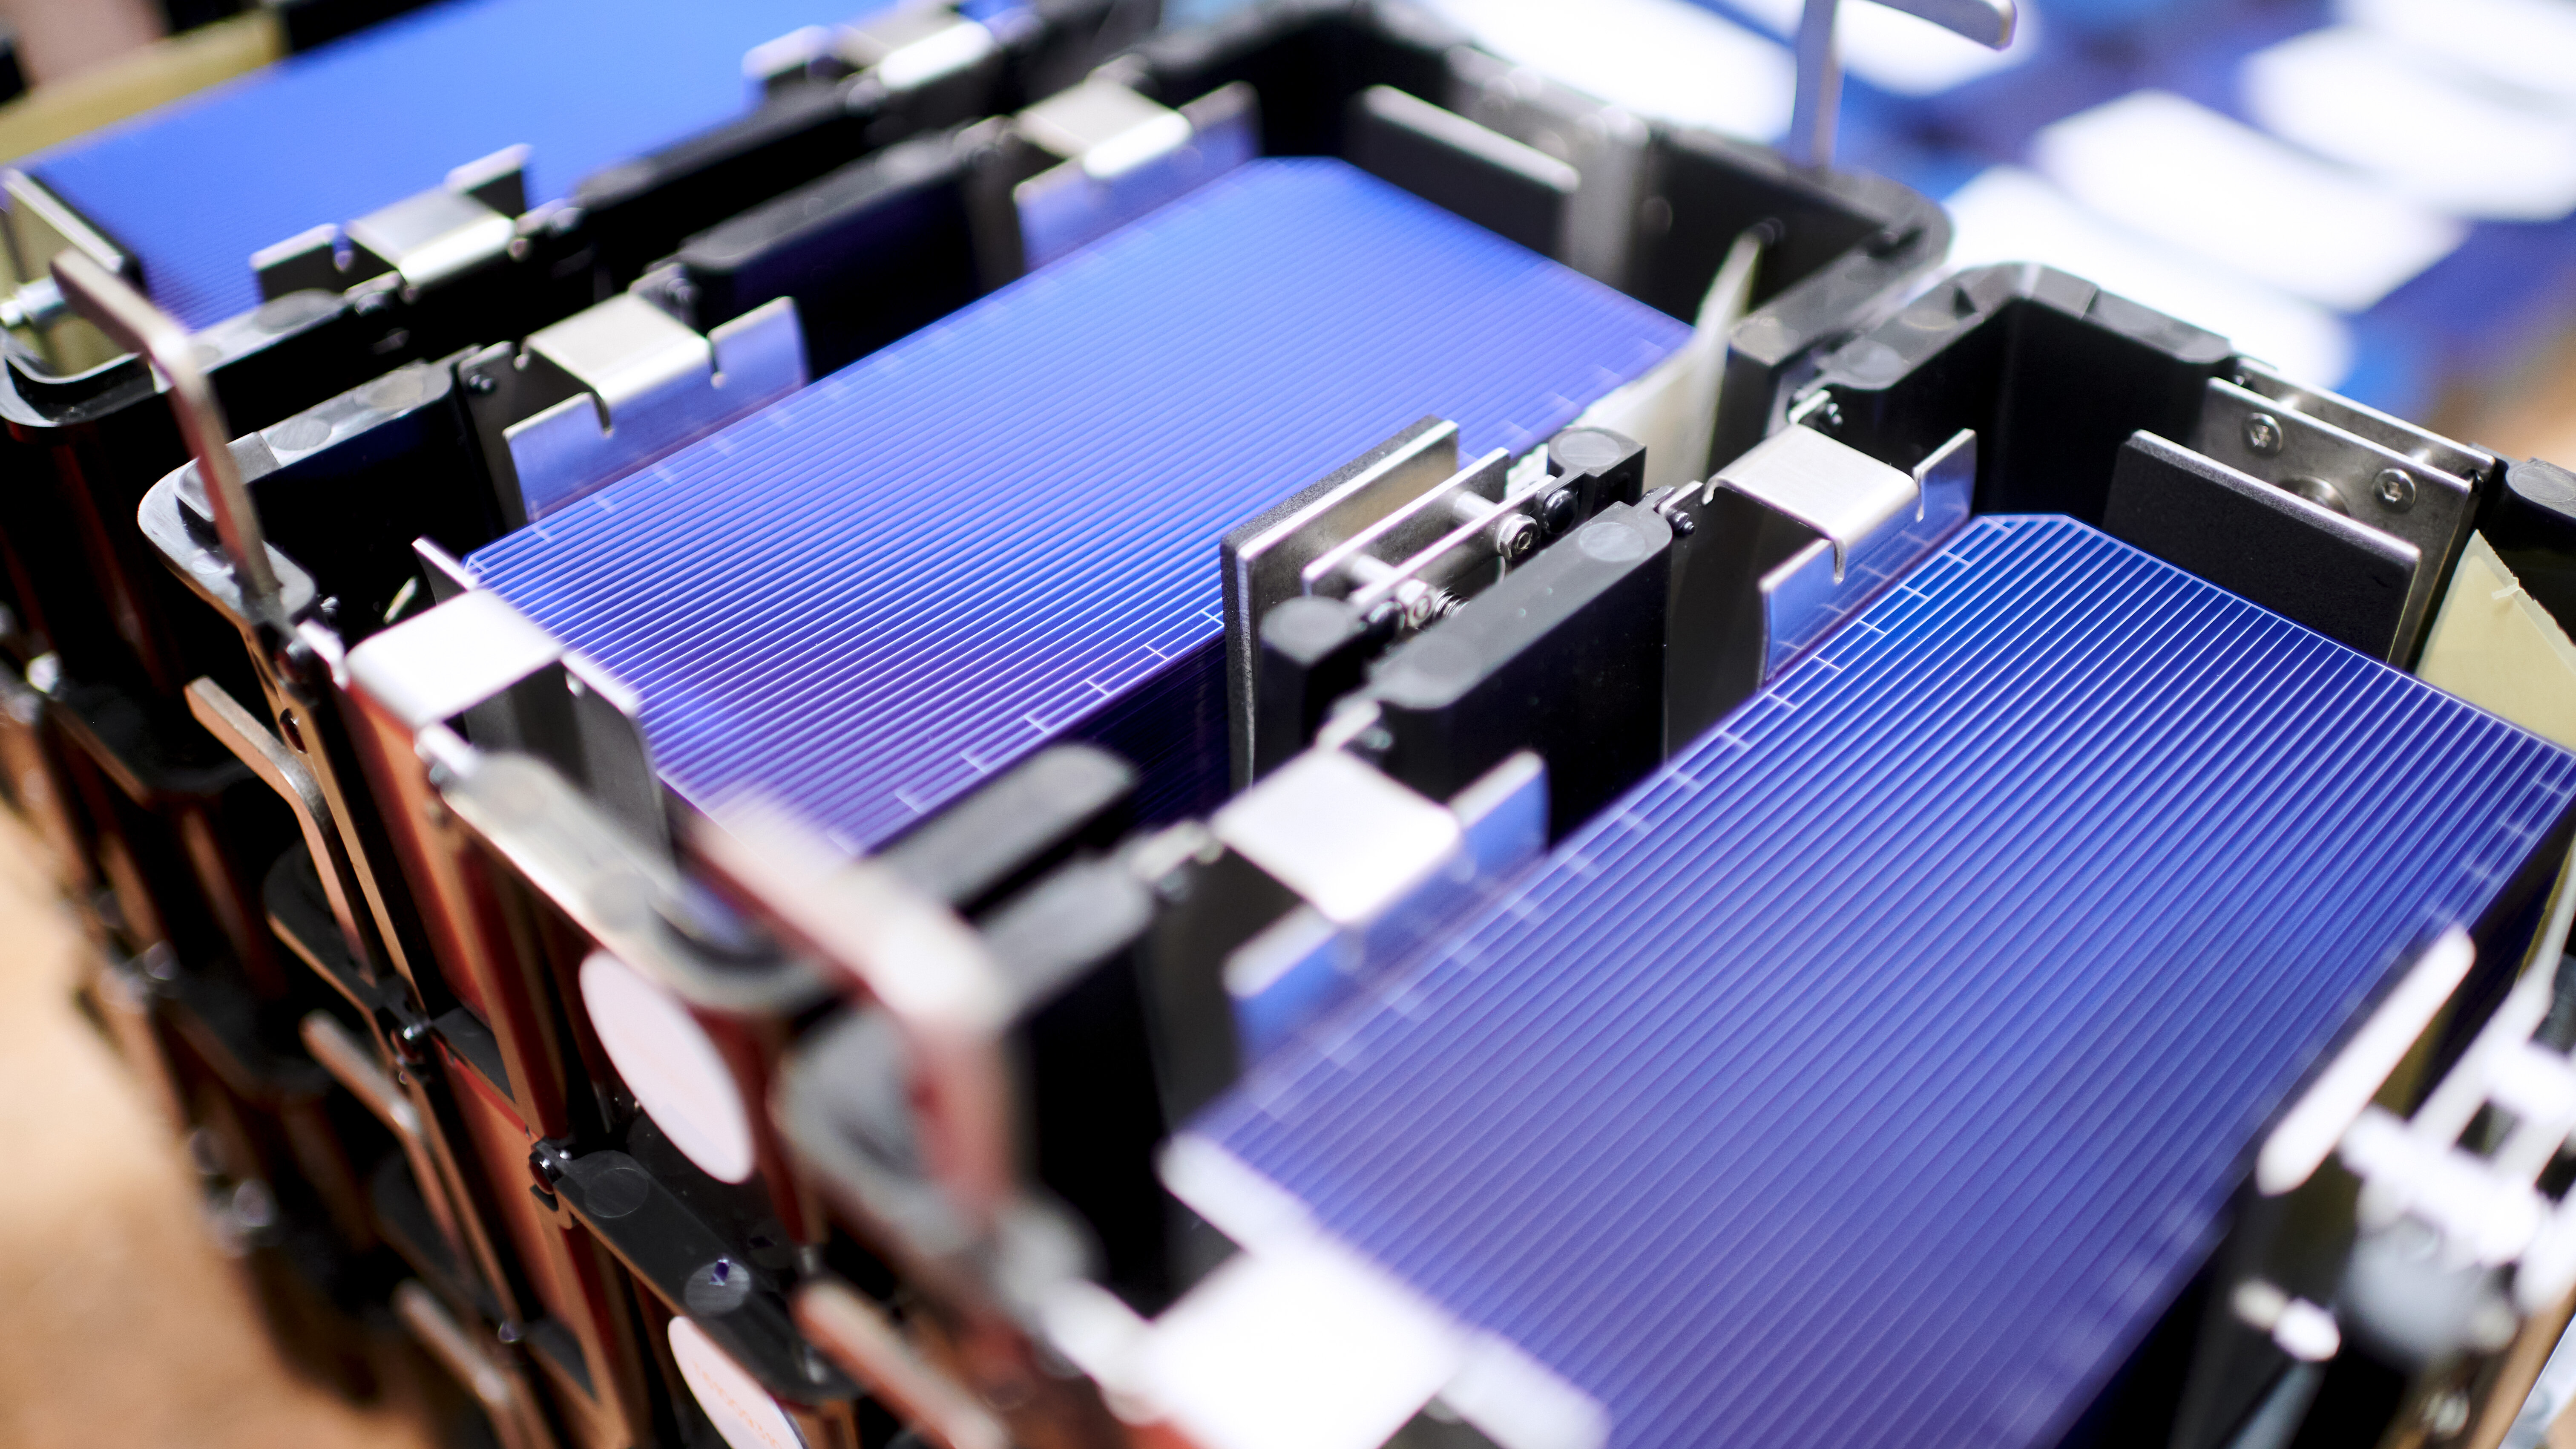 Solar cells from Thalheim to be used in module production